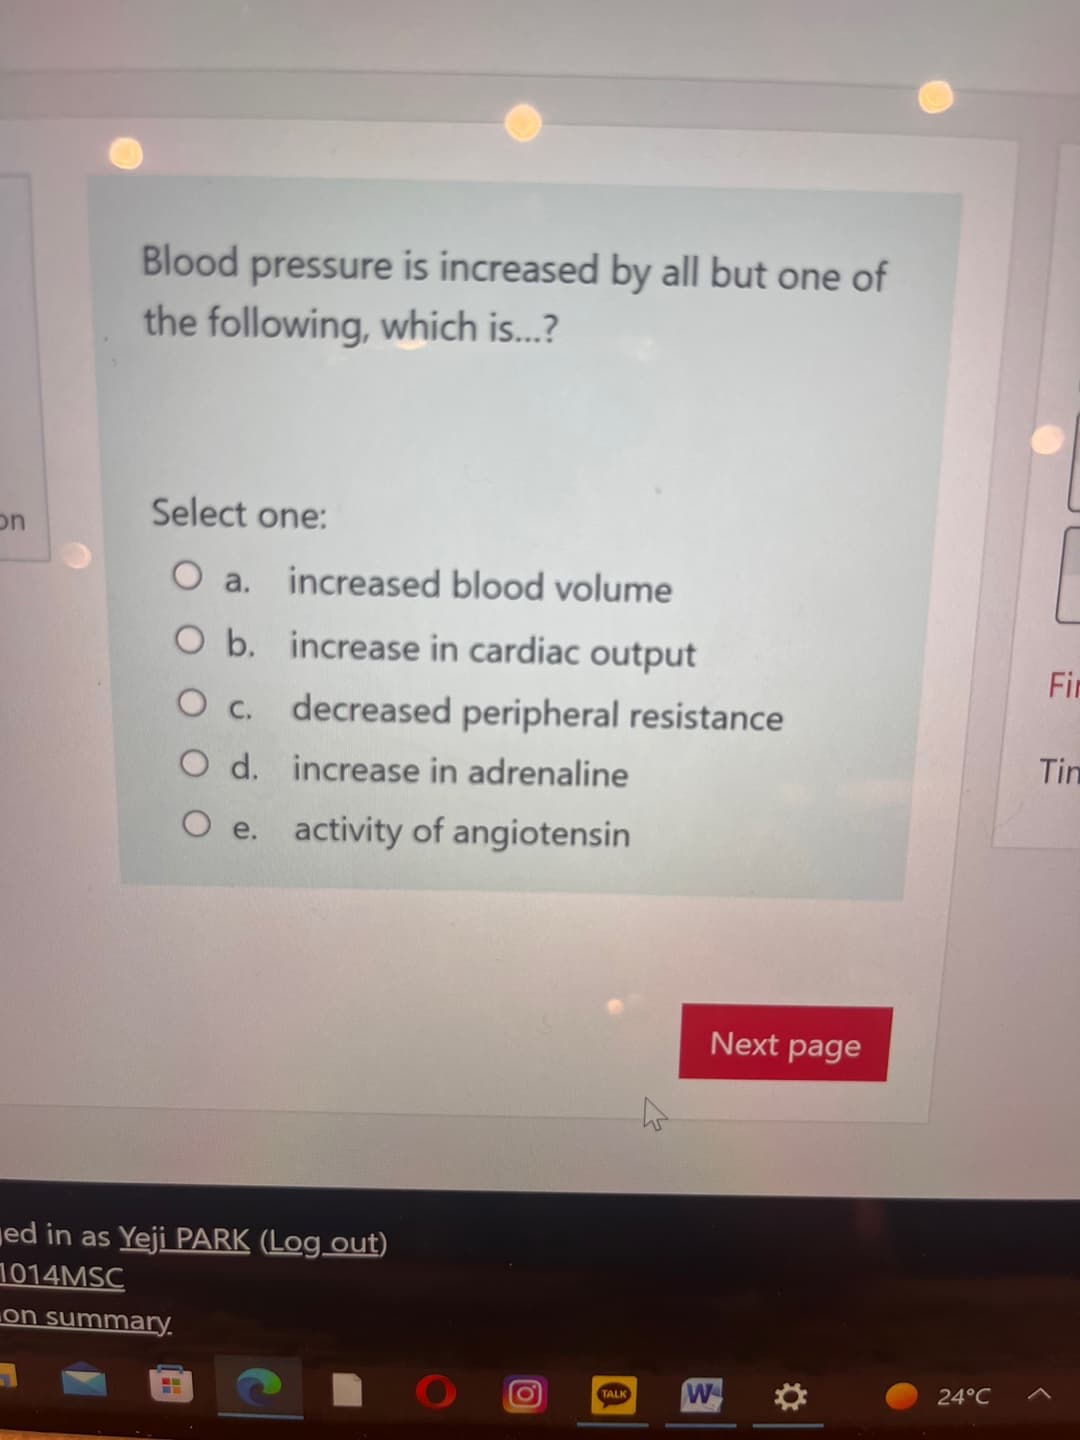 on
Blood pressure is increased by all but one of
the following, which is...?
Select one:
O a. increased blood volume
O b. increase in cardiac output
O c. decreased peripheral resistance
O d. increase in adrenaline
O e. activity of angiotensin
ed in as Yeji PARK (Log out)
1014MSC
on summary.
(0)
Next page
TALK W
24°C
Fir
Tin